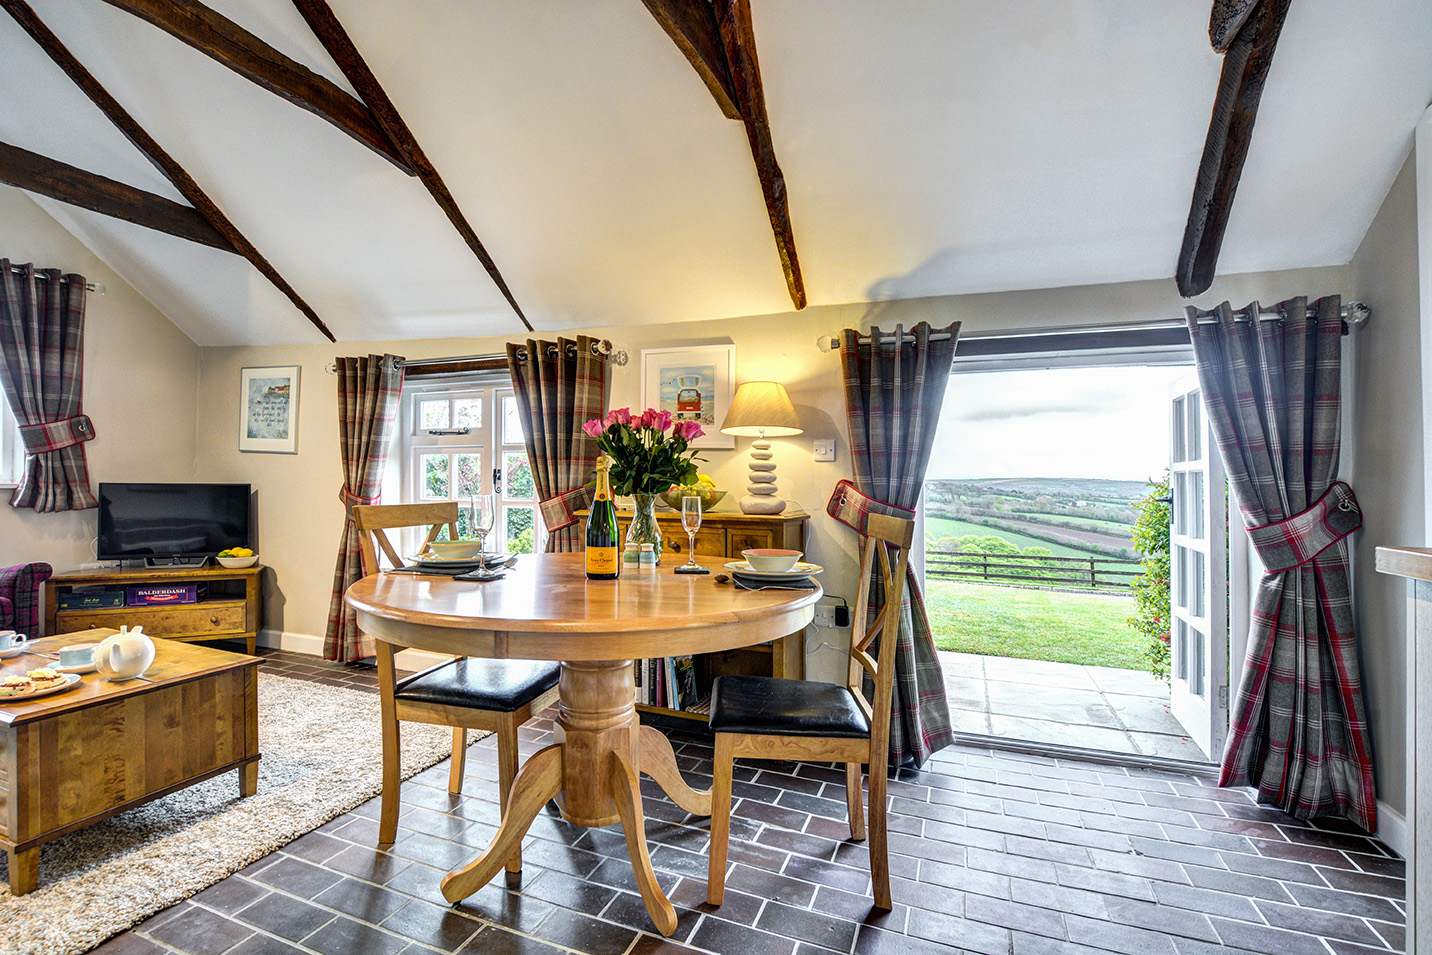 The lounge and dining area looking out the patio doors of The Linney self catering cottage converted barn at Penrose Burden holiday cottages in Cornwall.jpg